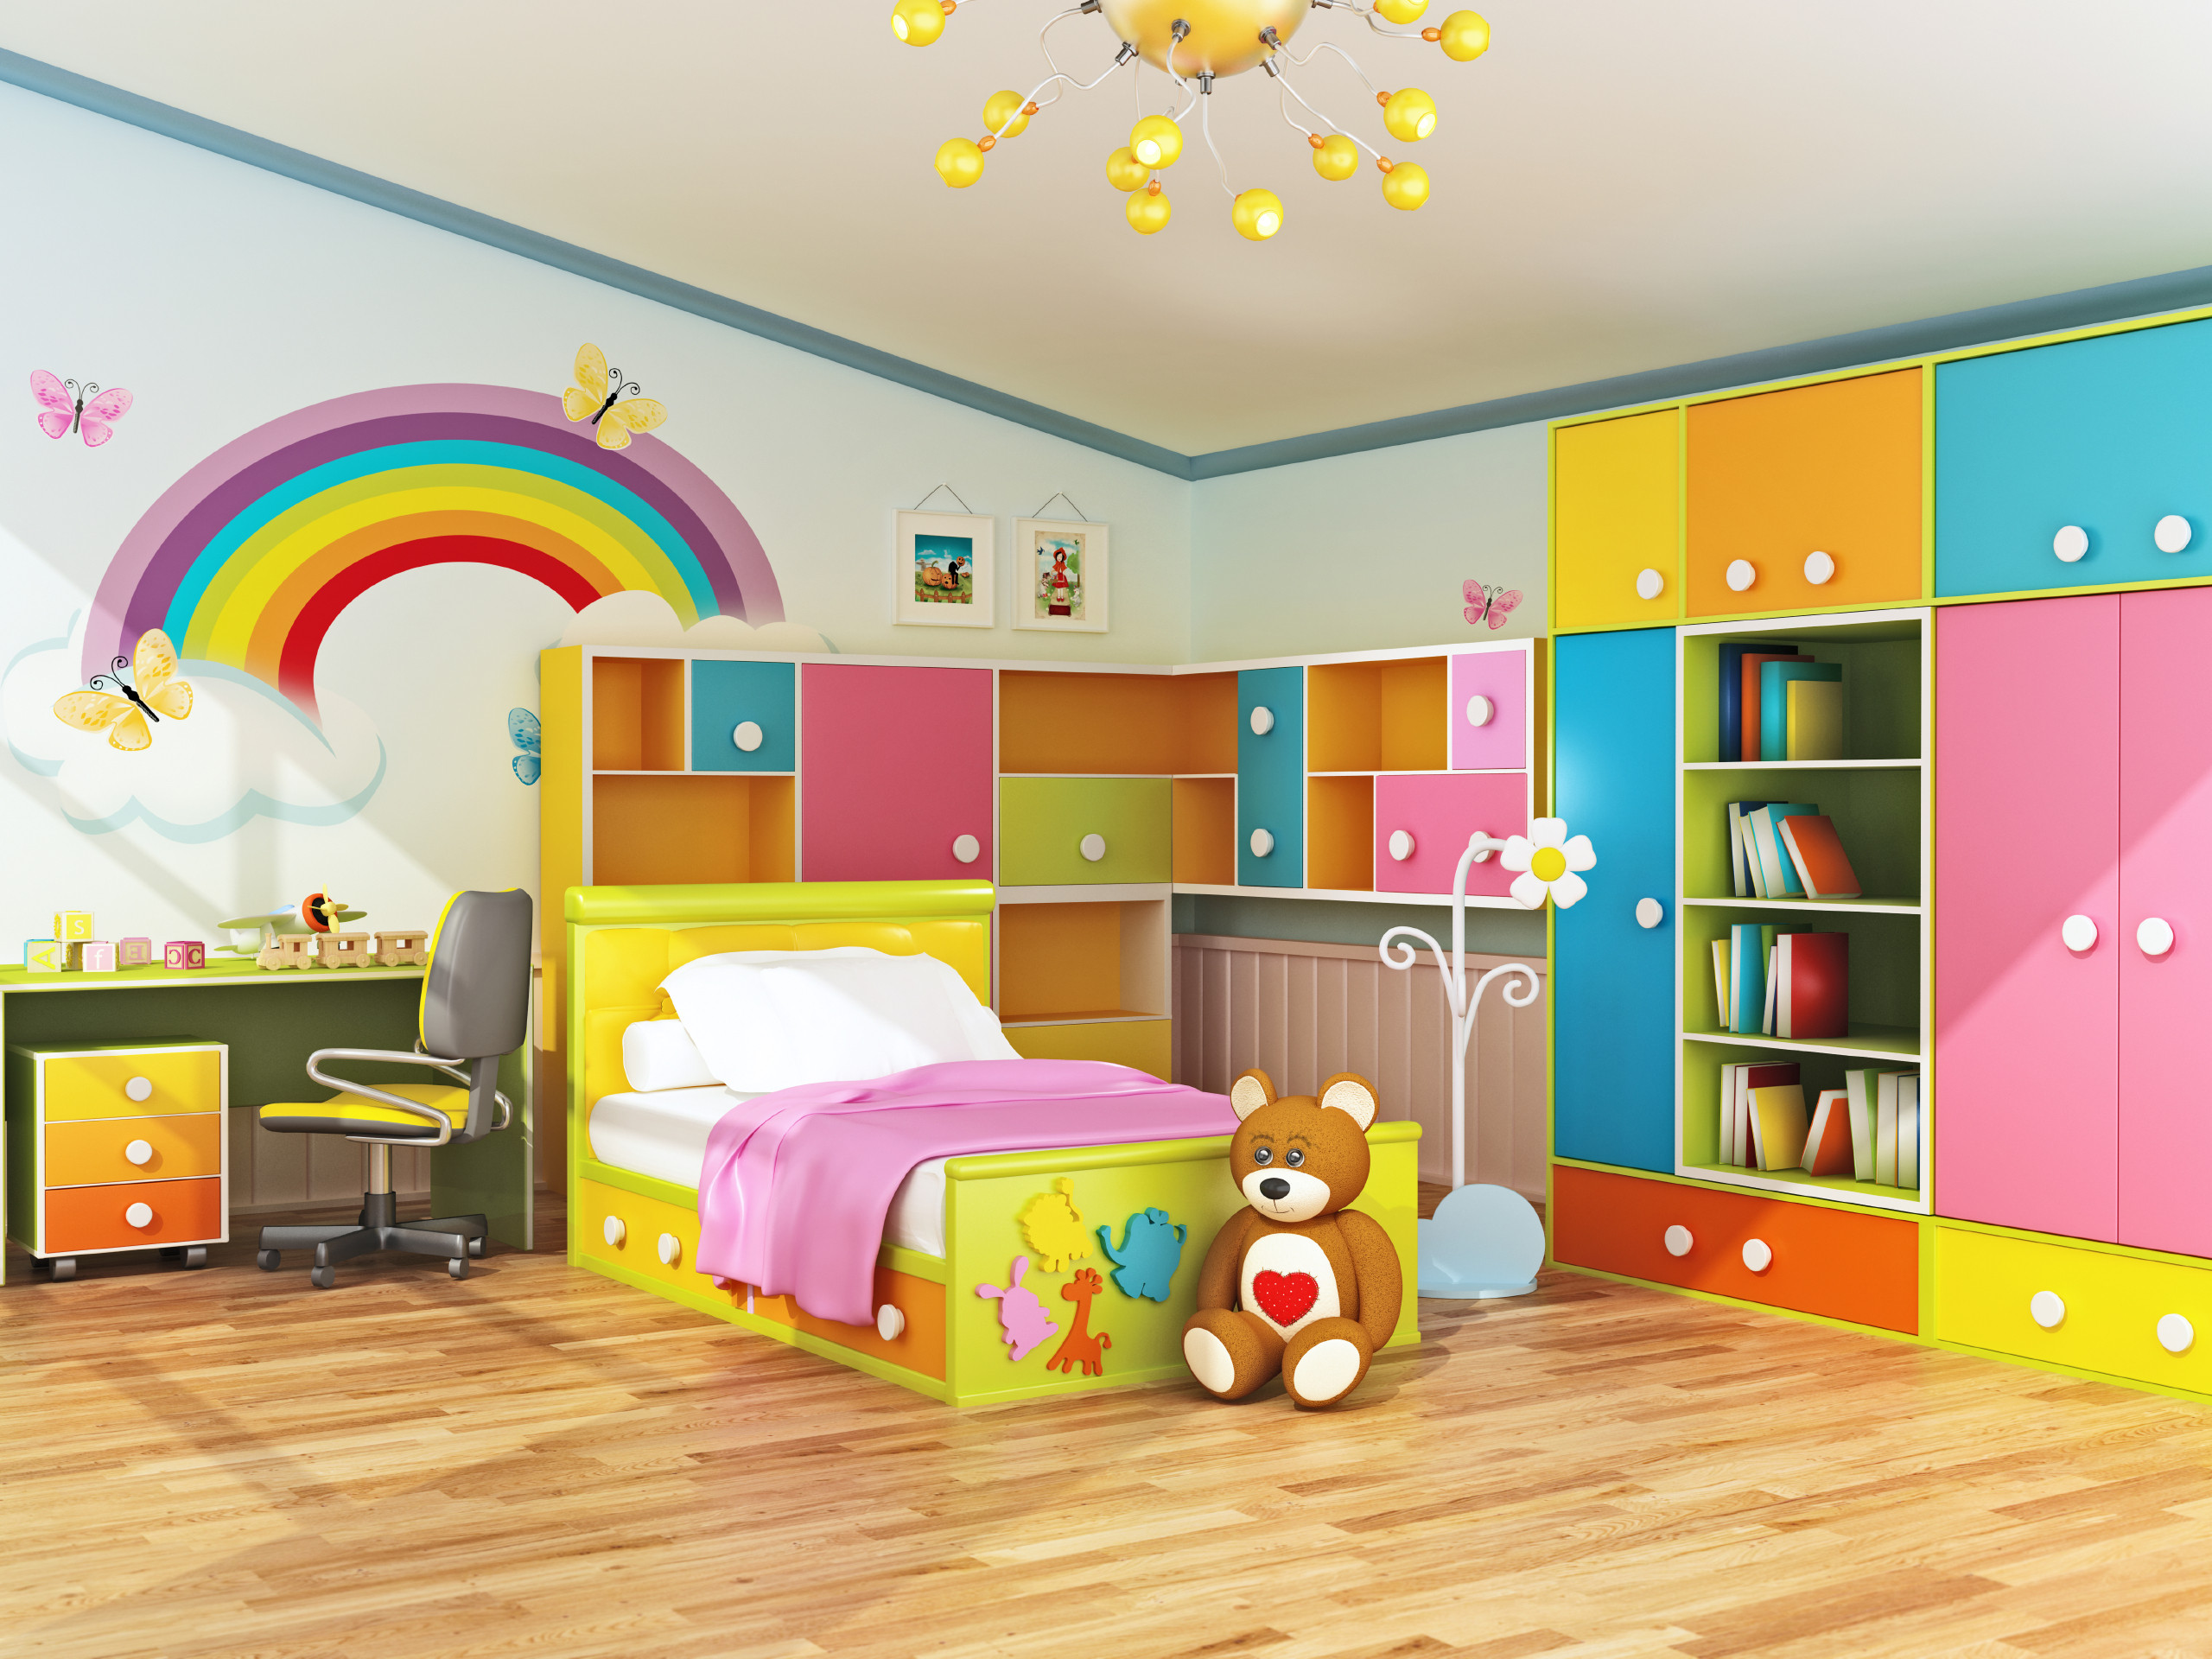 Ideas For Kids Room
 Plan Ahead When Decorating Kids Bedrooms